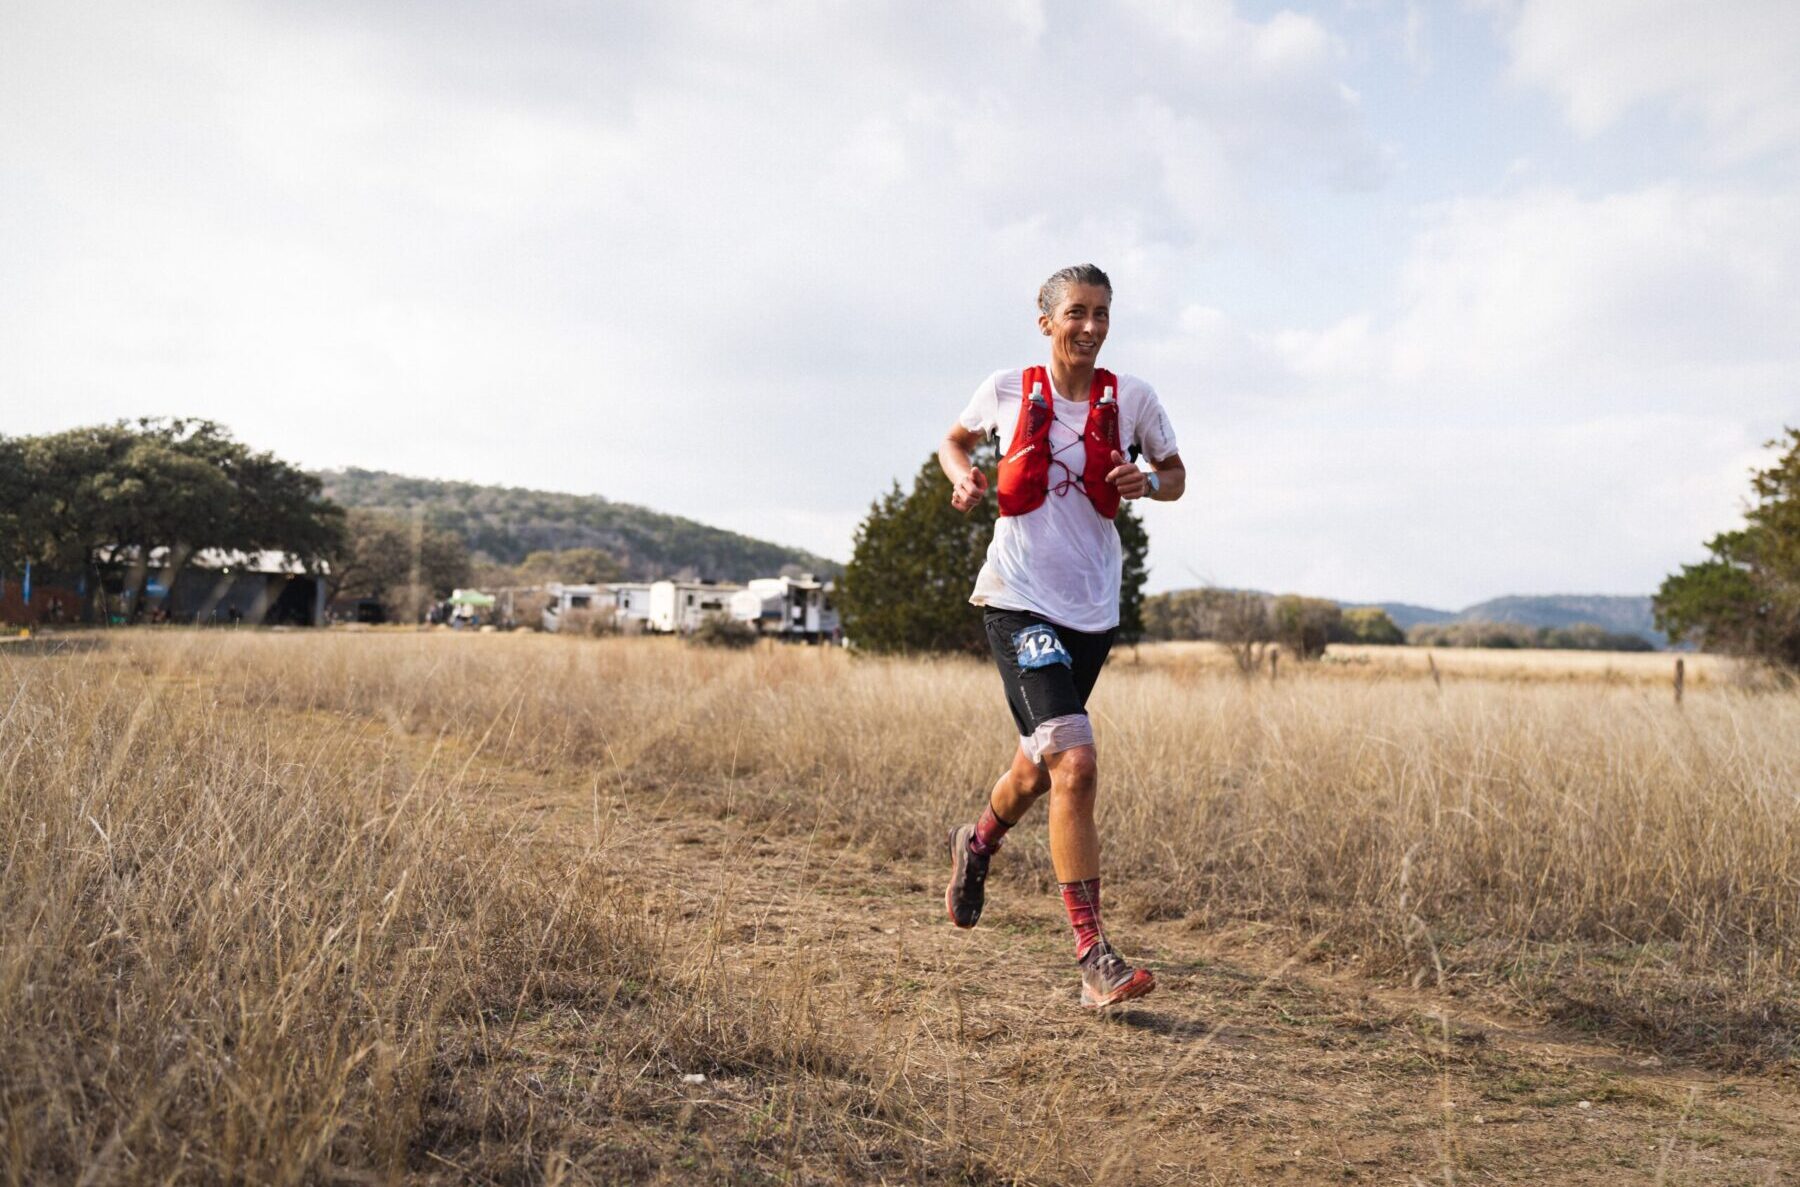 Courtney Dauwalter on her way to winning the 2023 Bandera 100k (Photo by Tony DiPasquale)